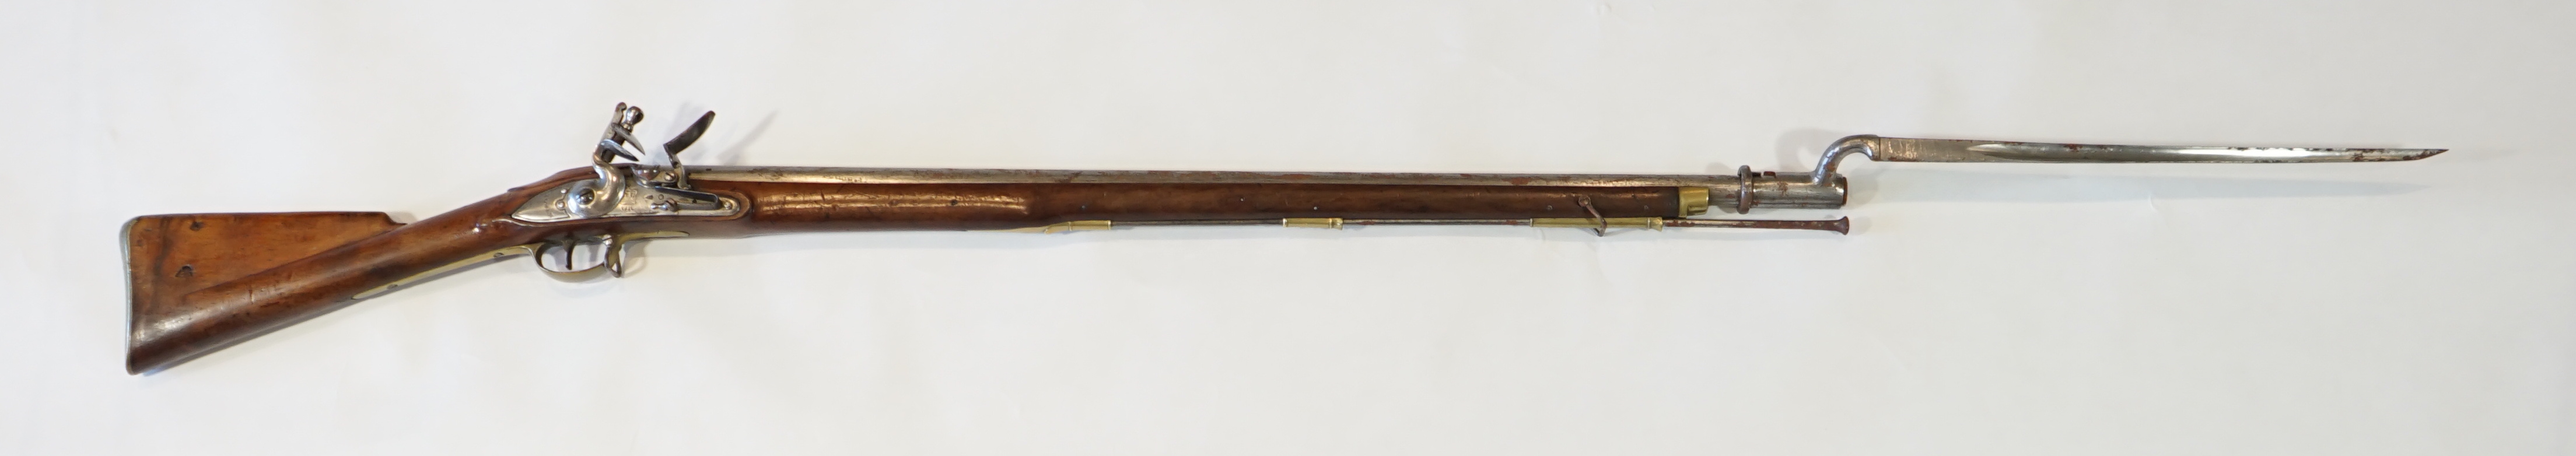 A 10 bore Brown Bess British military flintlock musket, barrel length 36.5 inches